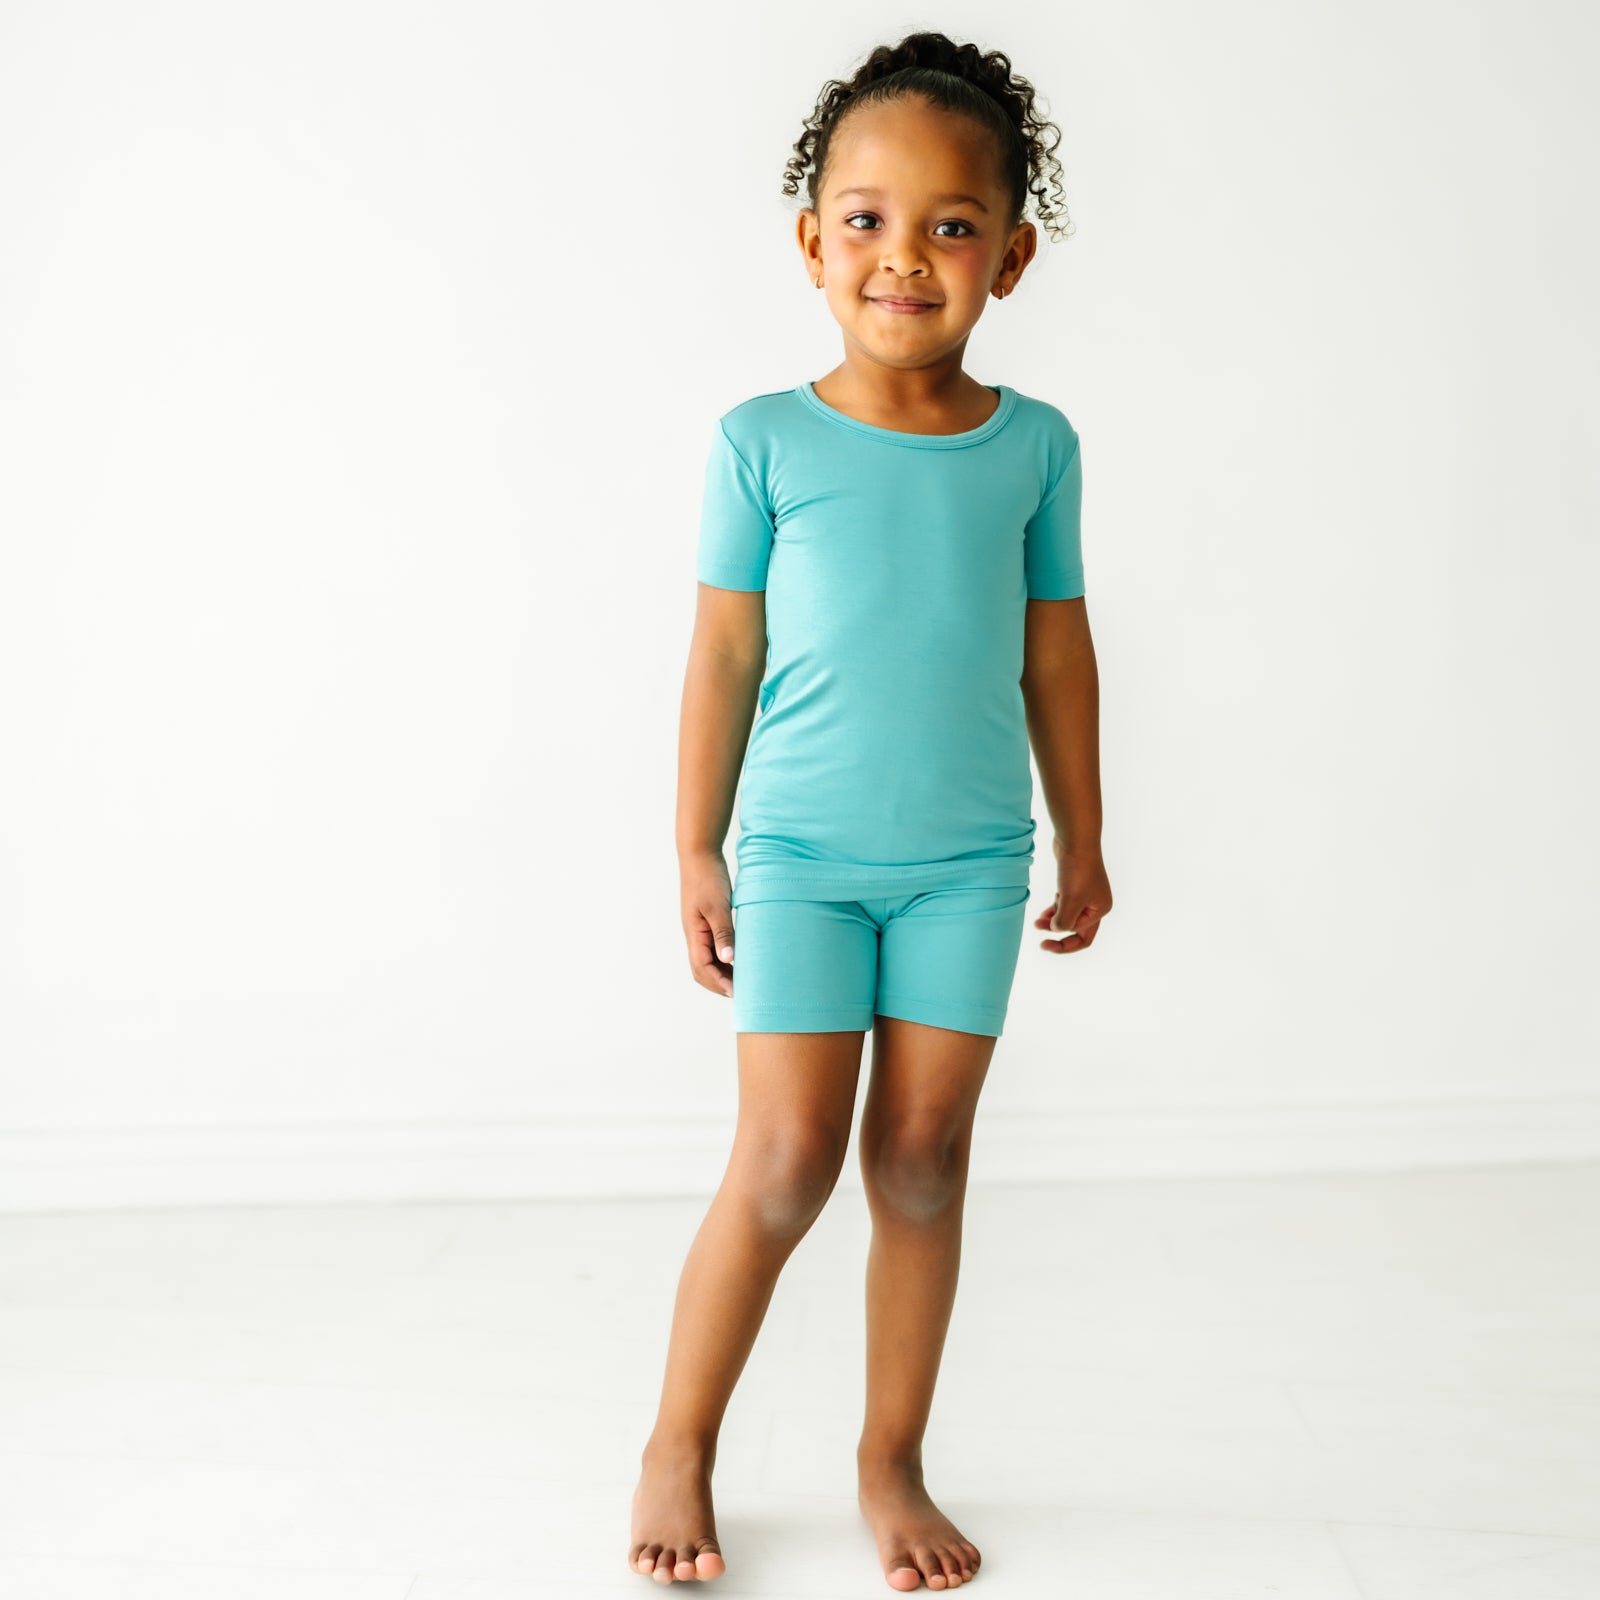 Child wearing a Glacier Turquoise two piece short sleeve and shorts pajama set